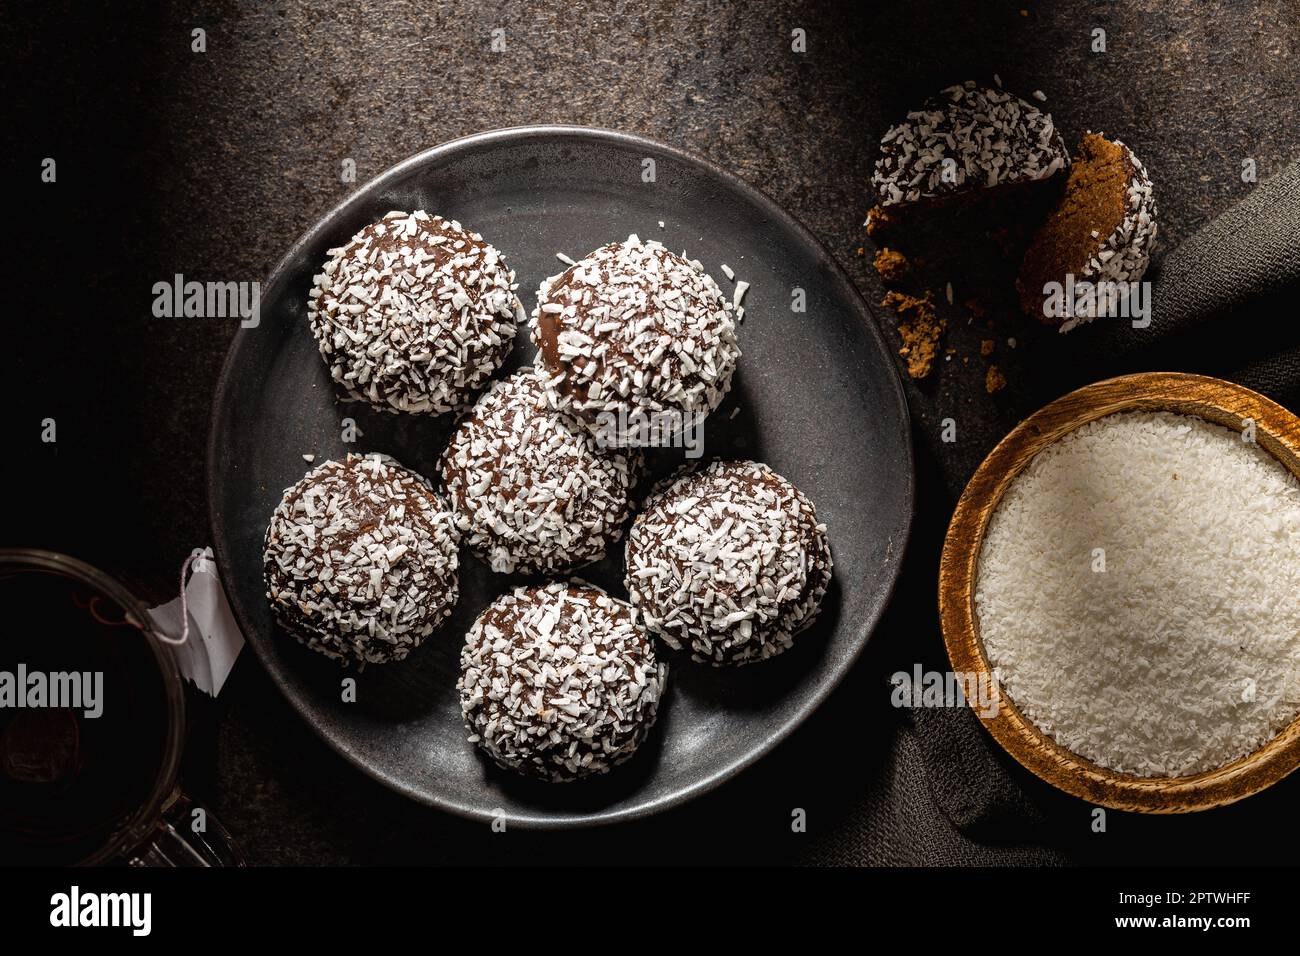 Coconut chocolate balls on the plate. Top view. Stock Photo